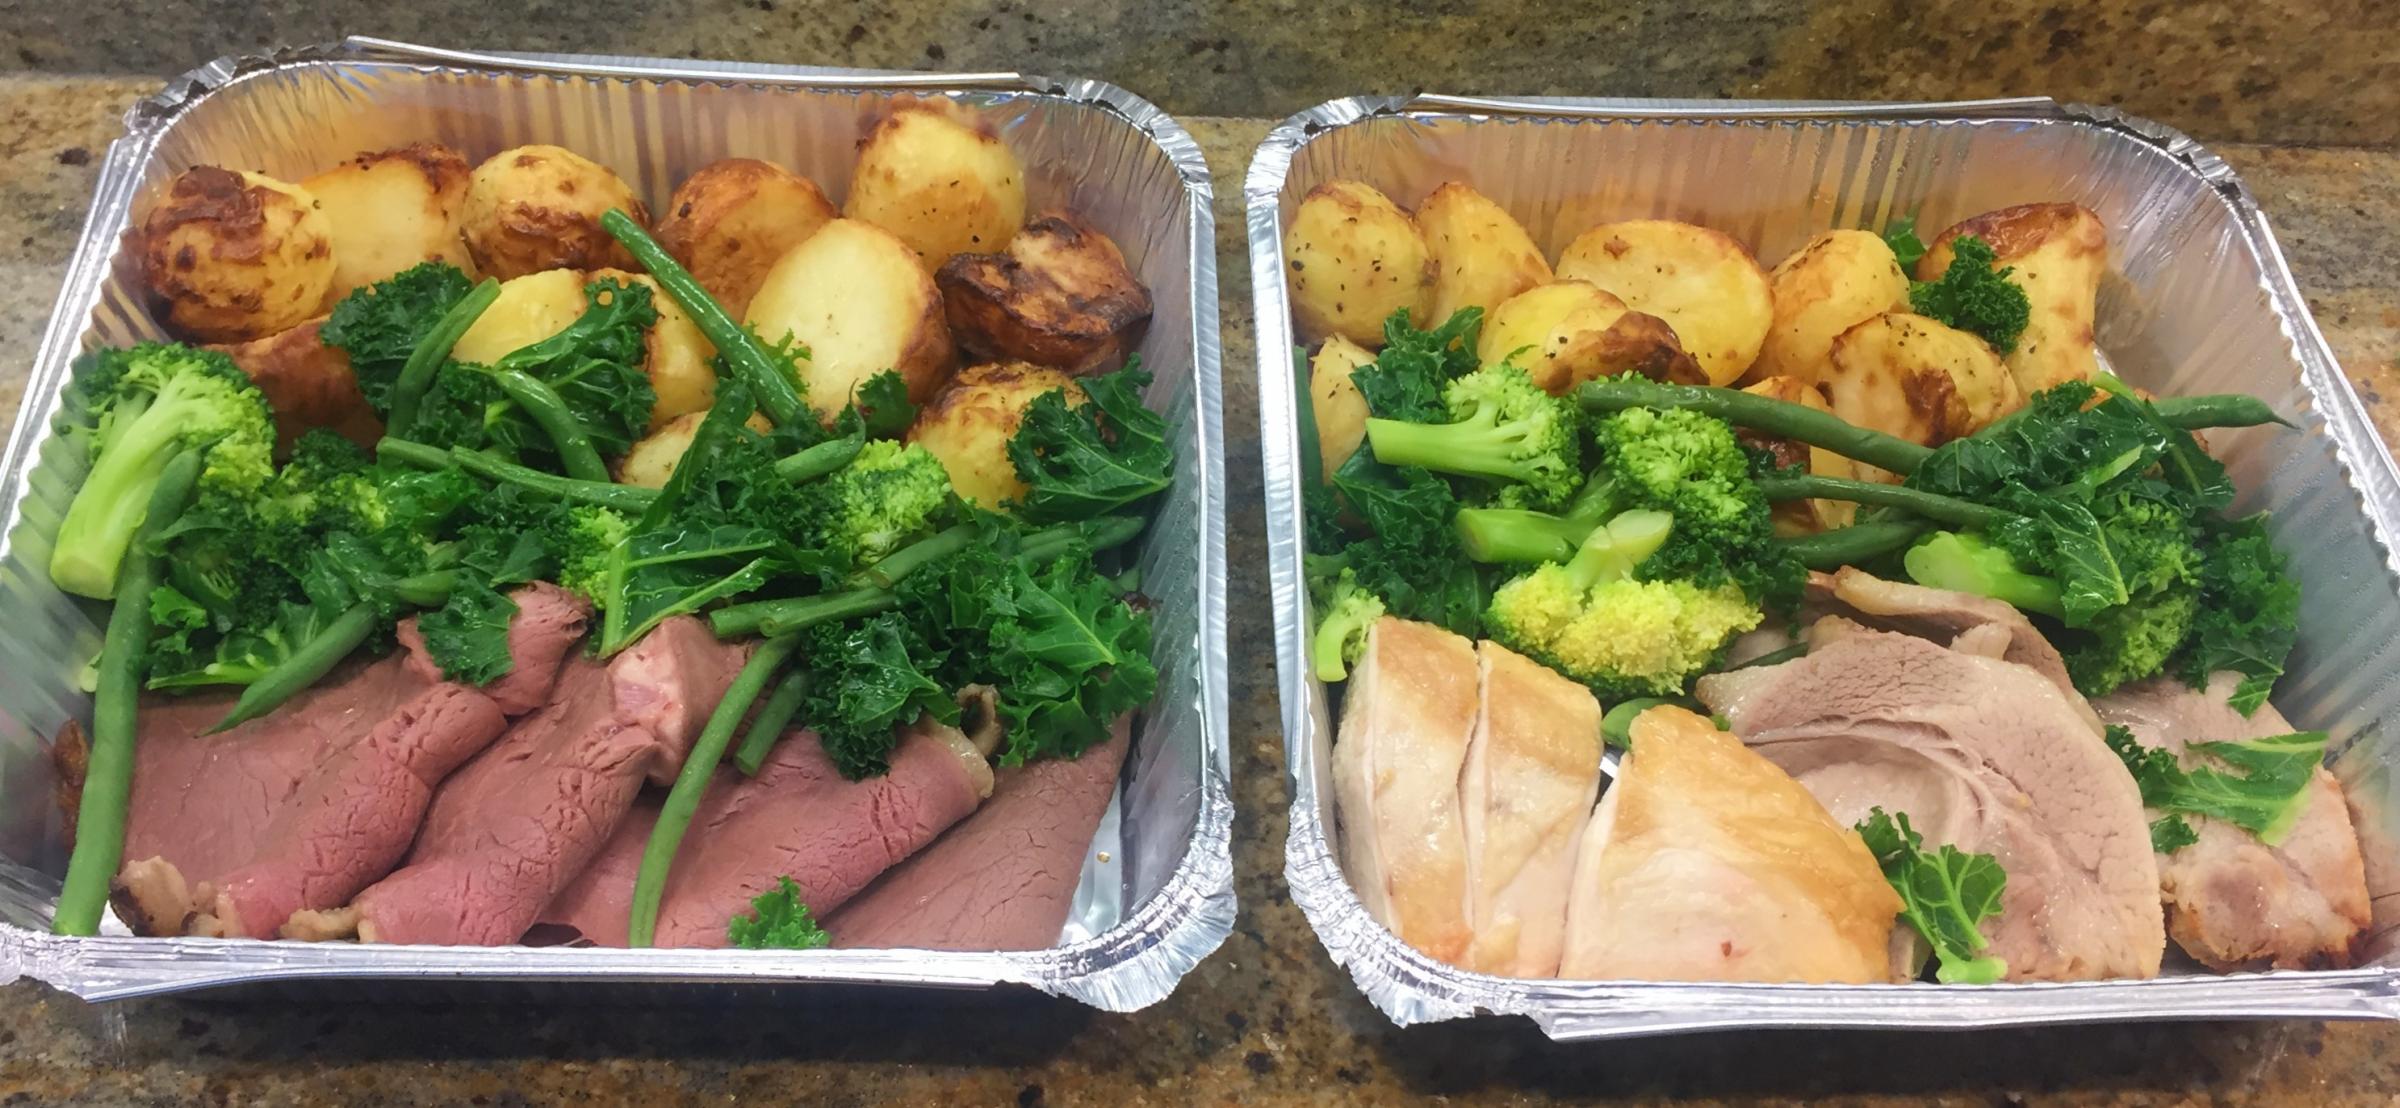 The roast dinners: two beef on the left, and chicken and pork on the right, with plenty of vegetables and potatoes